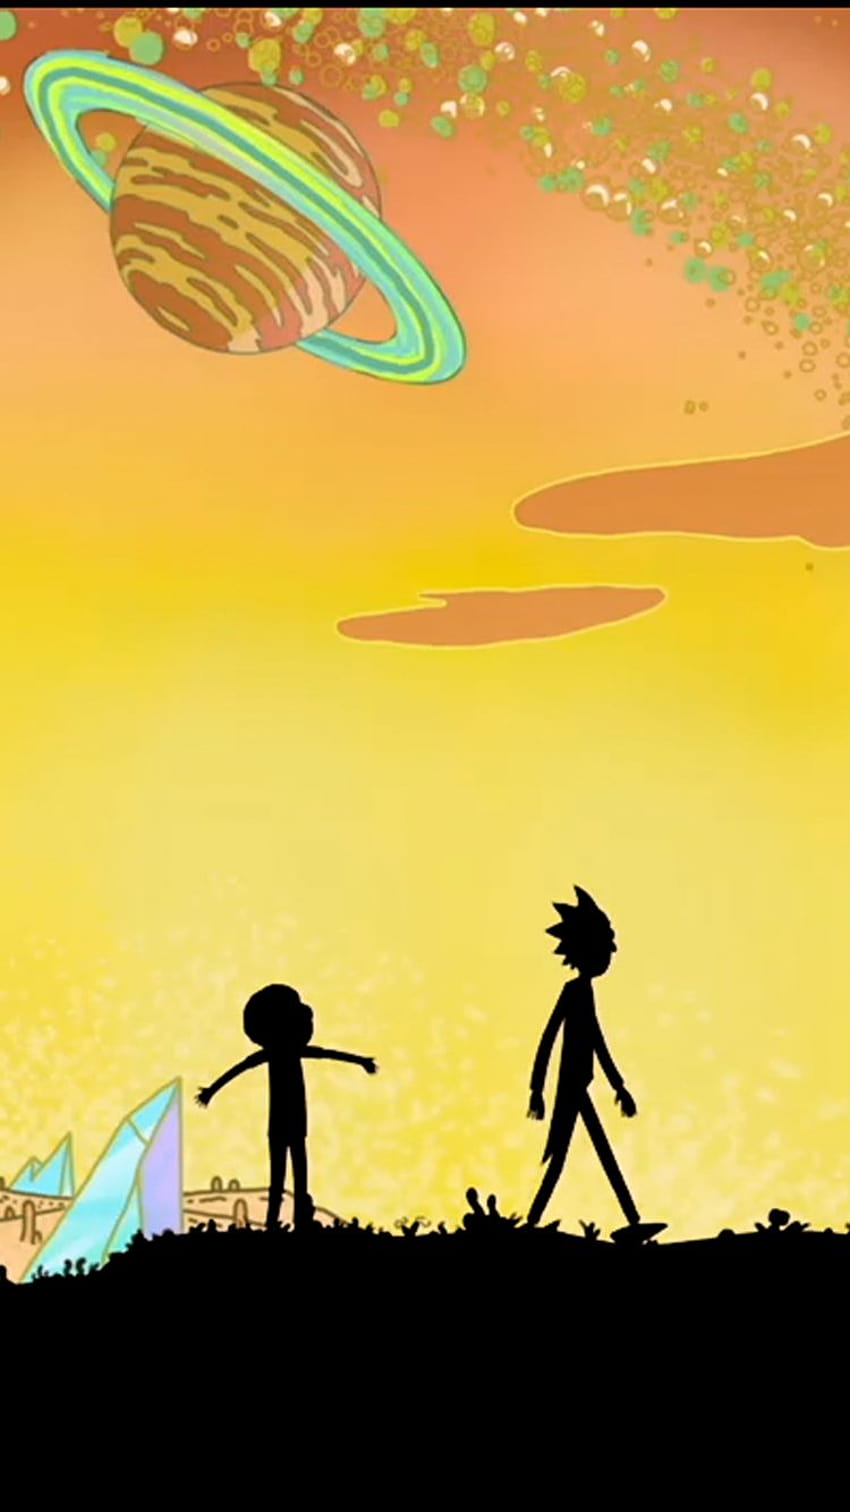 Morty? The answer is: Don't think about it., ricky and morty for android HD phone wallpaper